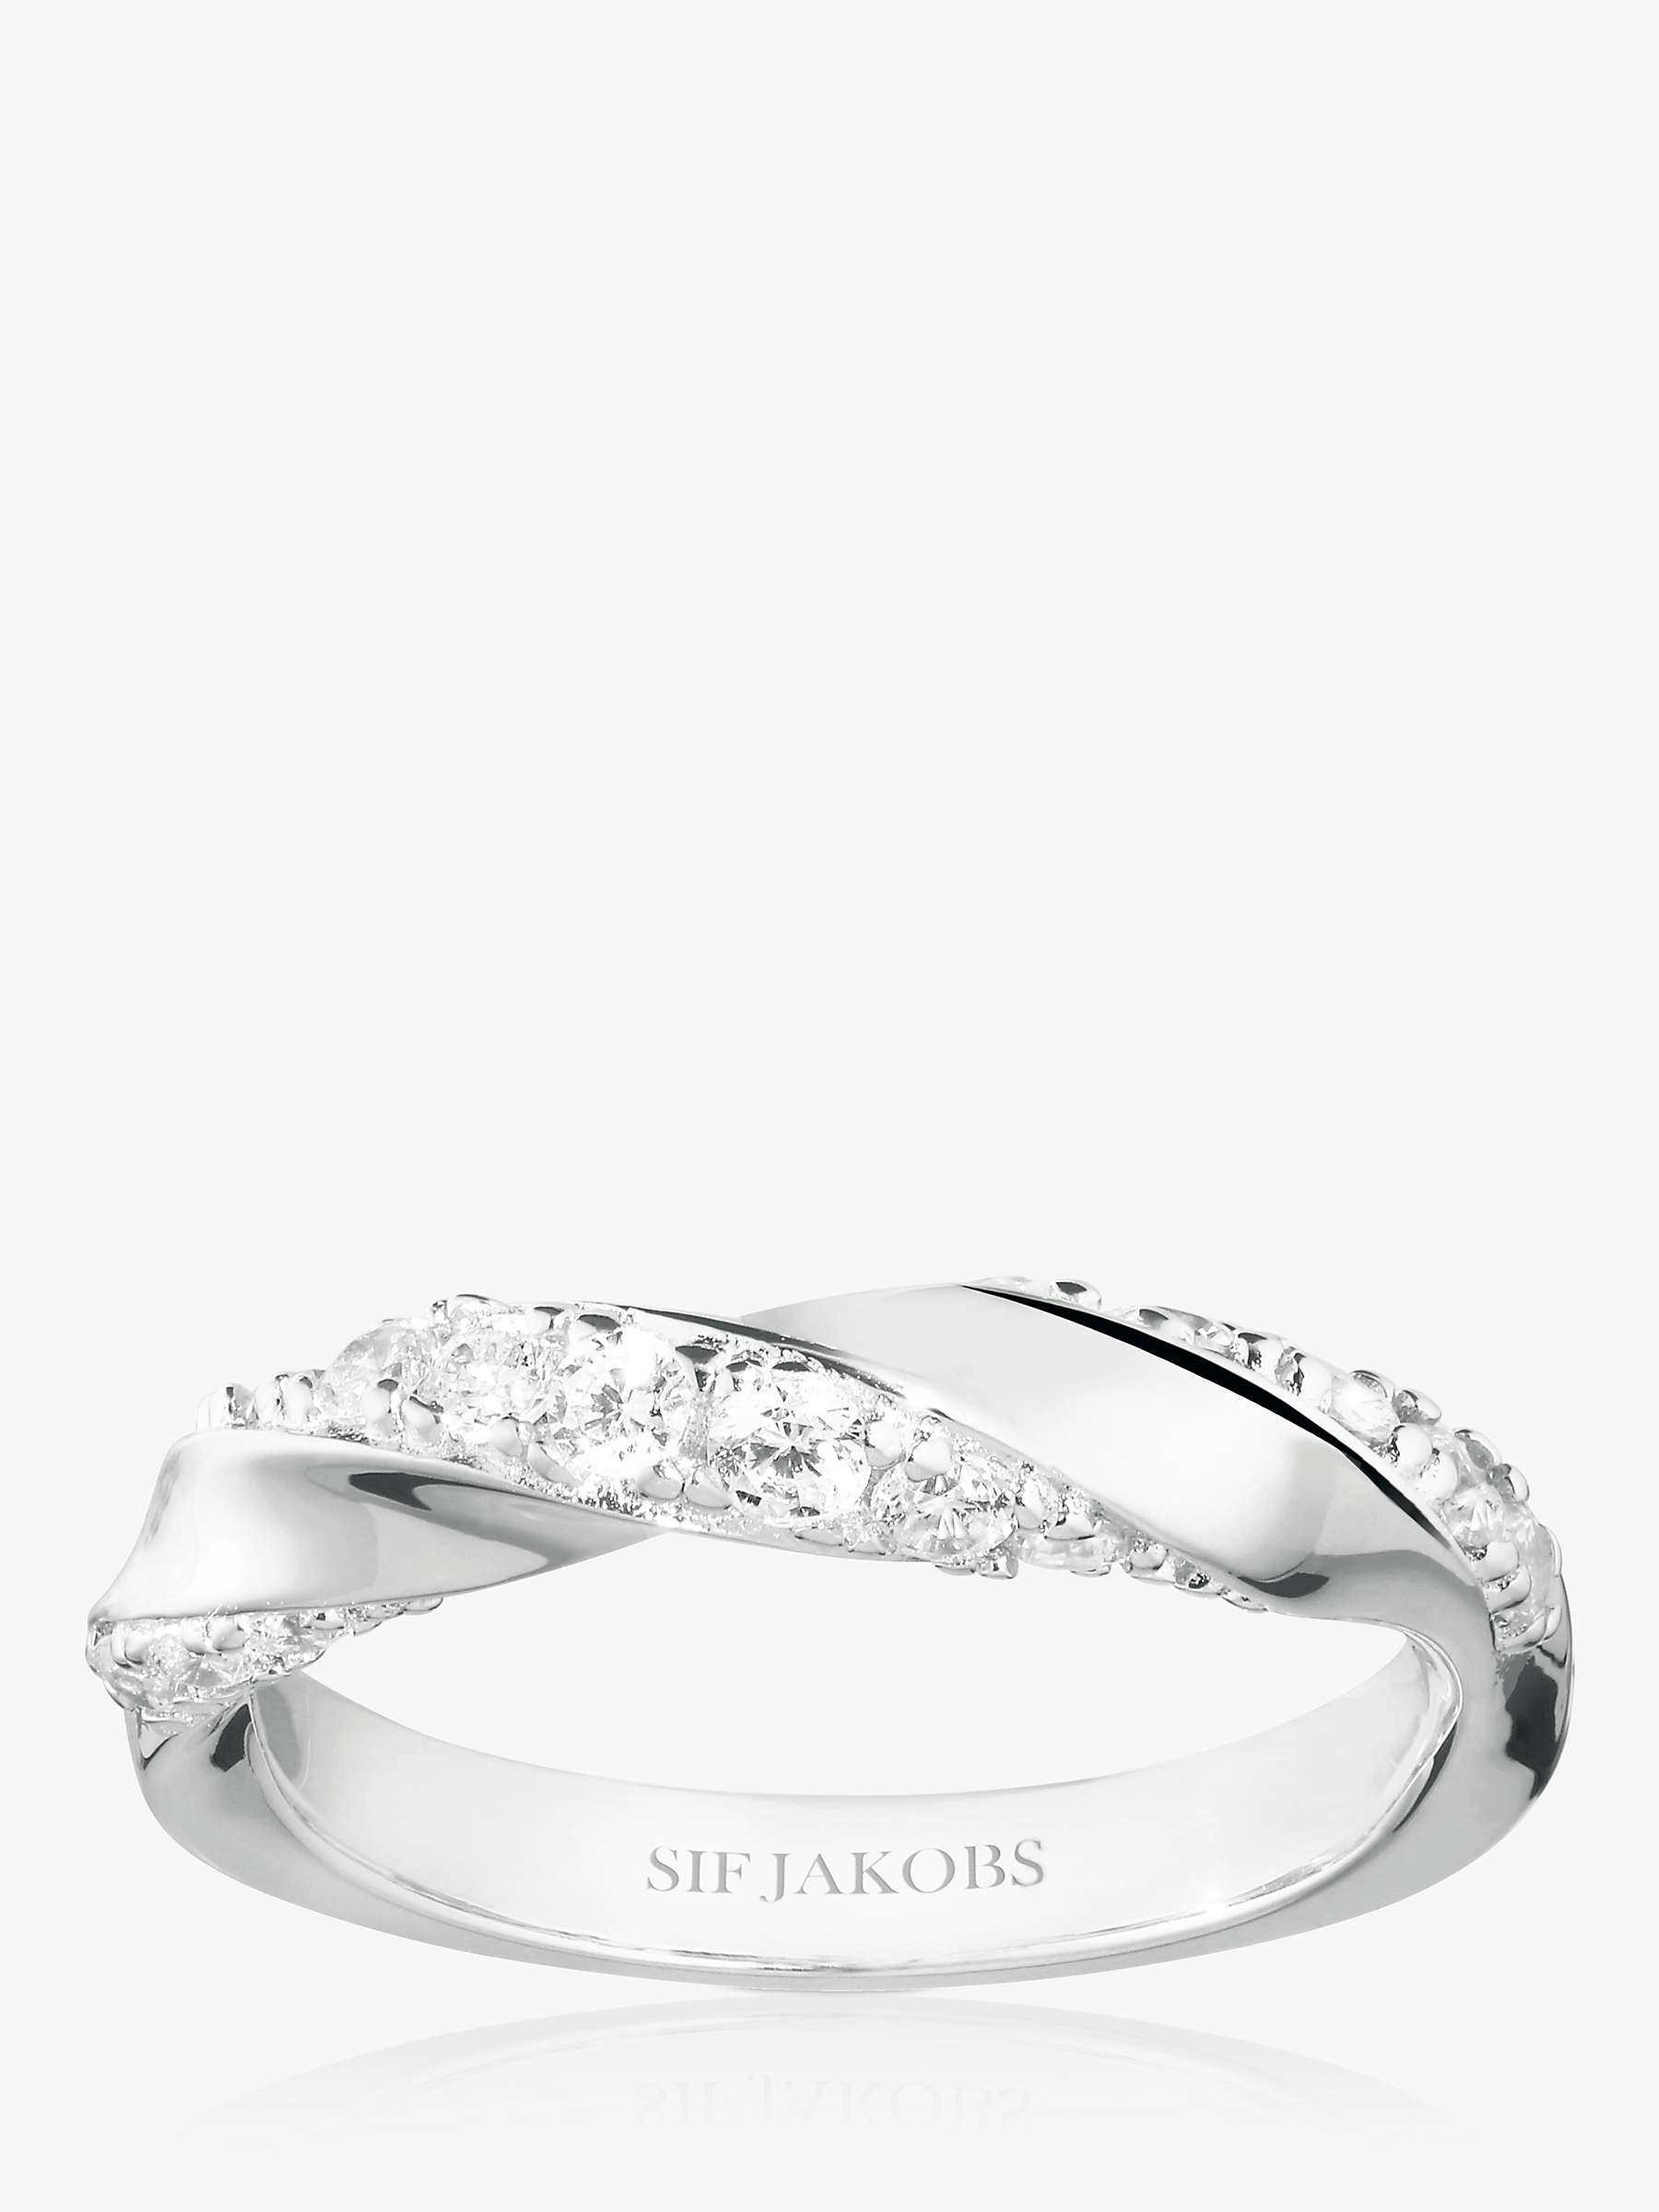 Buy Sif Jakobs Jewellery Ferrara Twisted Cubic Zirconia Band Ring, Silver Online at johnlewis.com